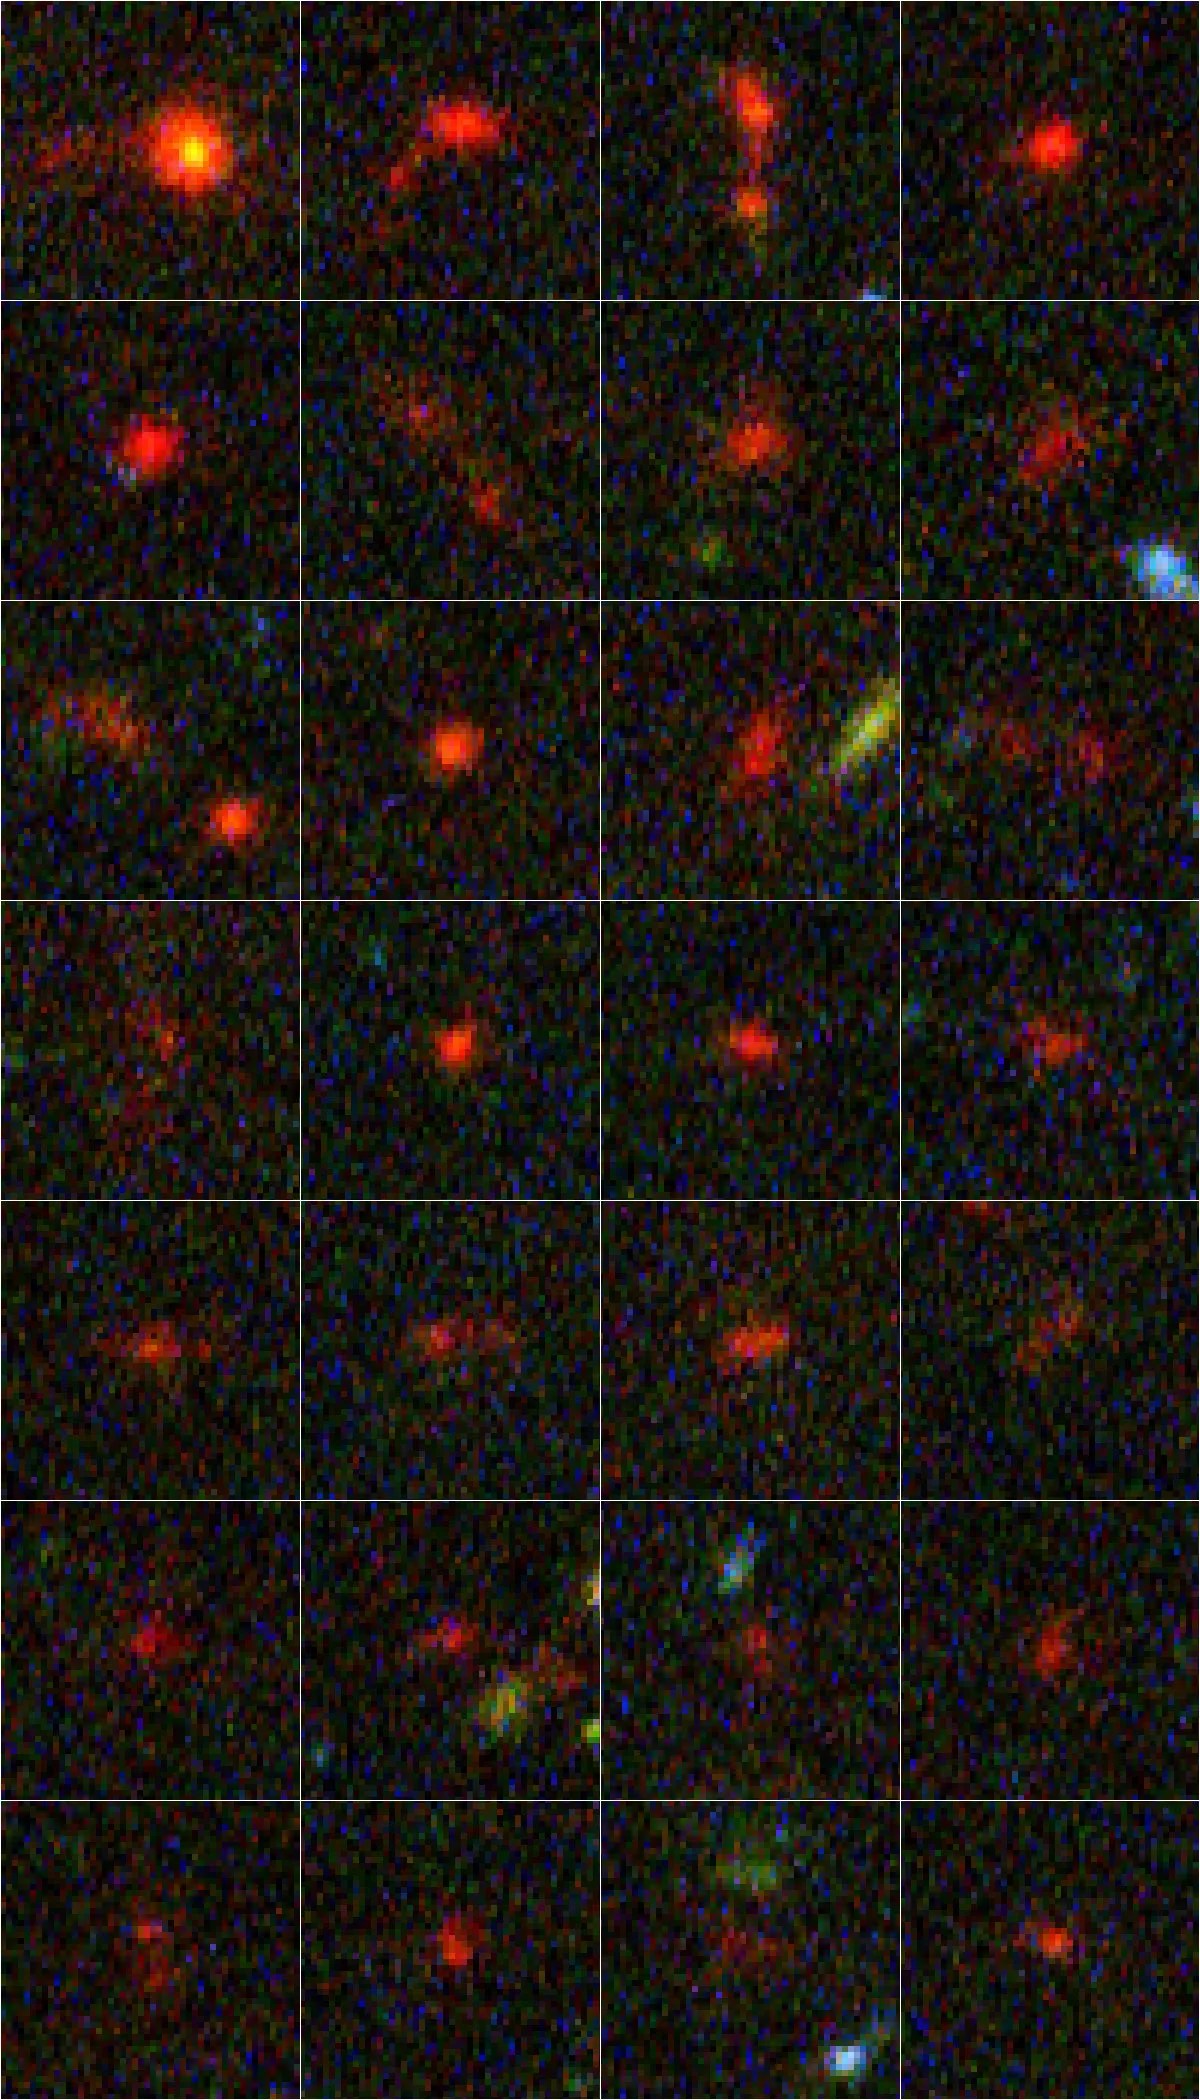 Faint, distant galaxies, observed by Hubble. They are arranged on four columns and seven rows. Most appear as red splotches. A few of the images also hold regions of yellow, blue, and or green pixels. 